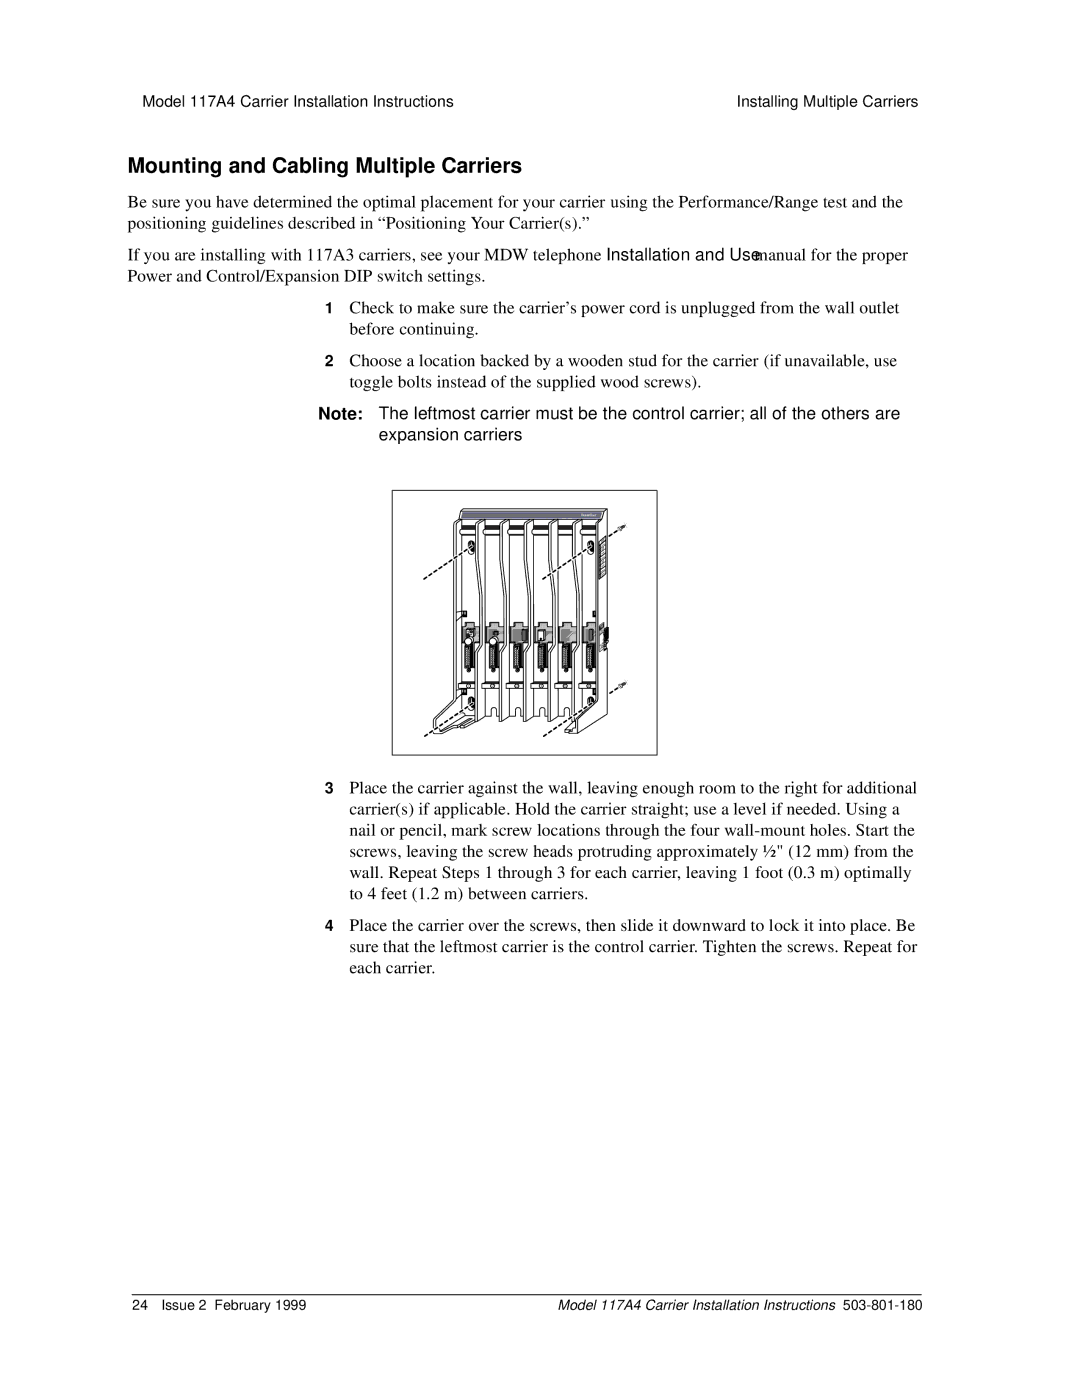 Lucent Technologies 117A4 installation instructions Mounting and Cabling Multiple Carriers 